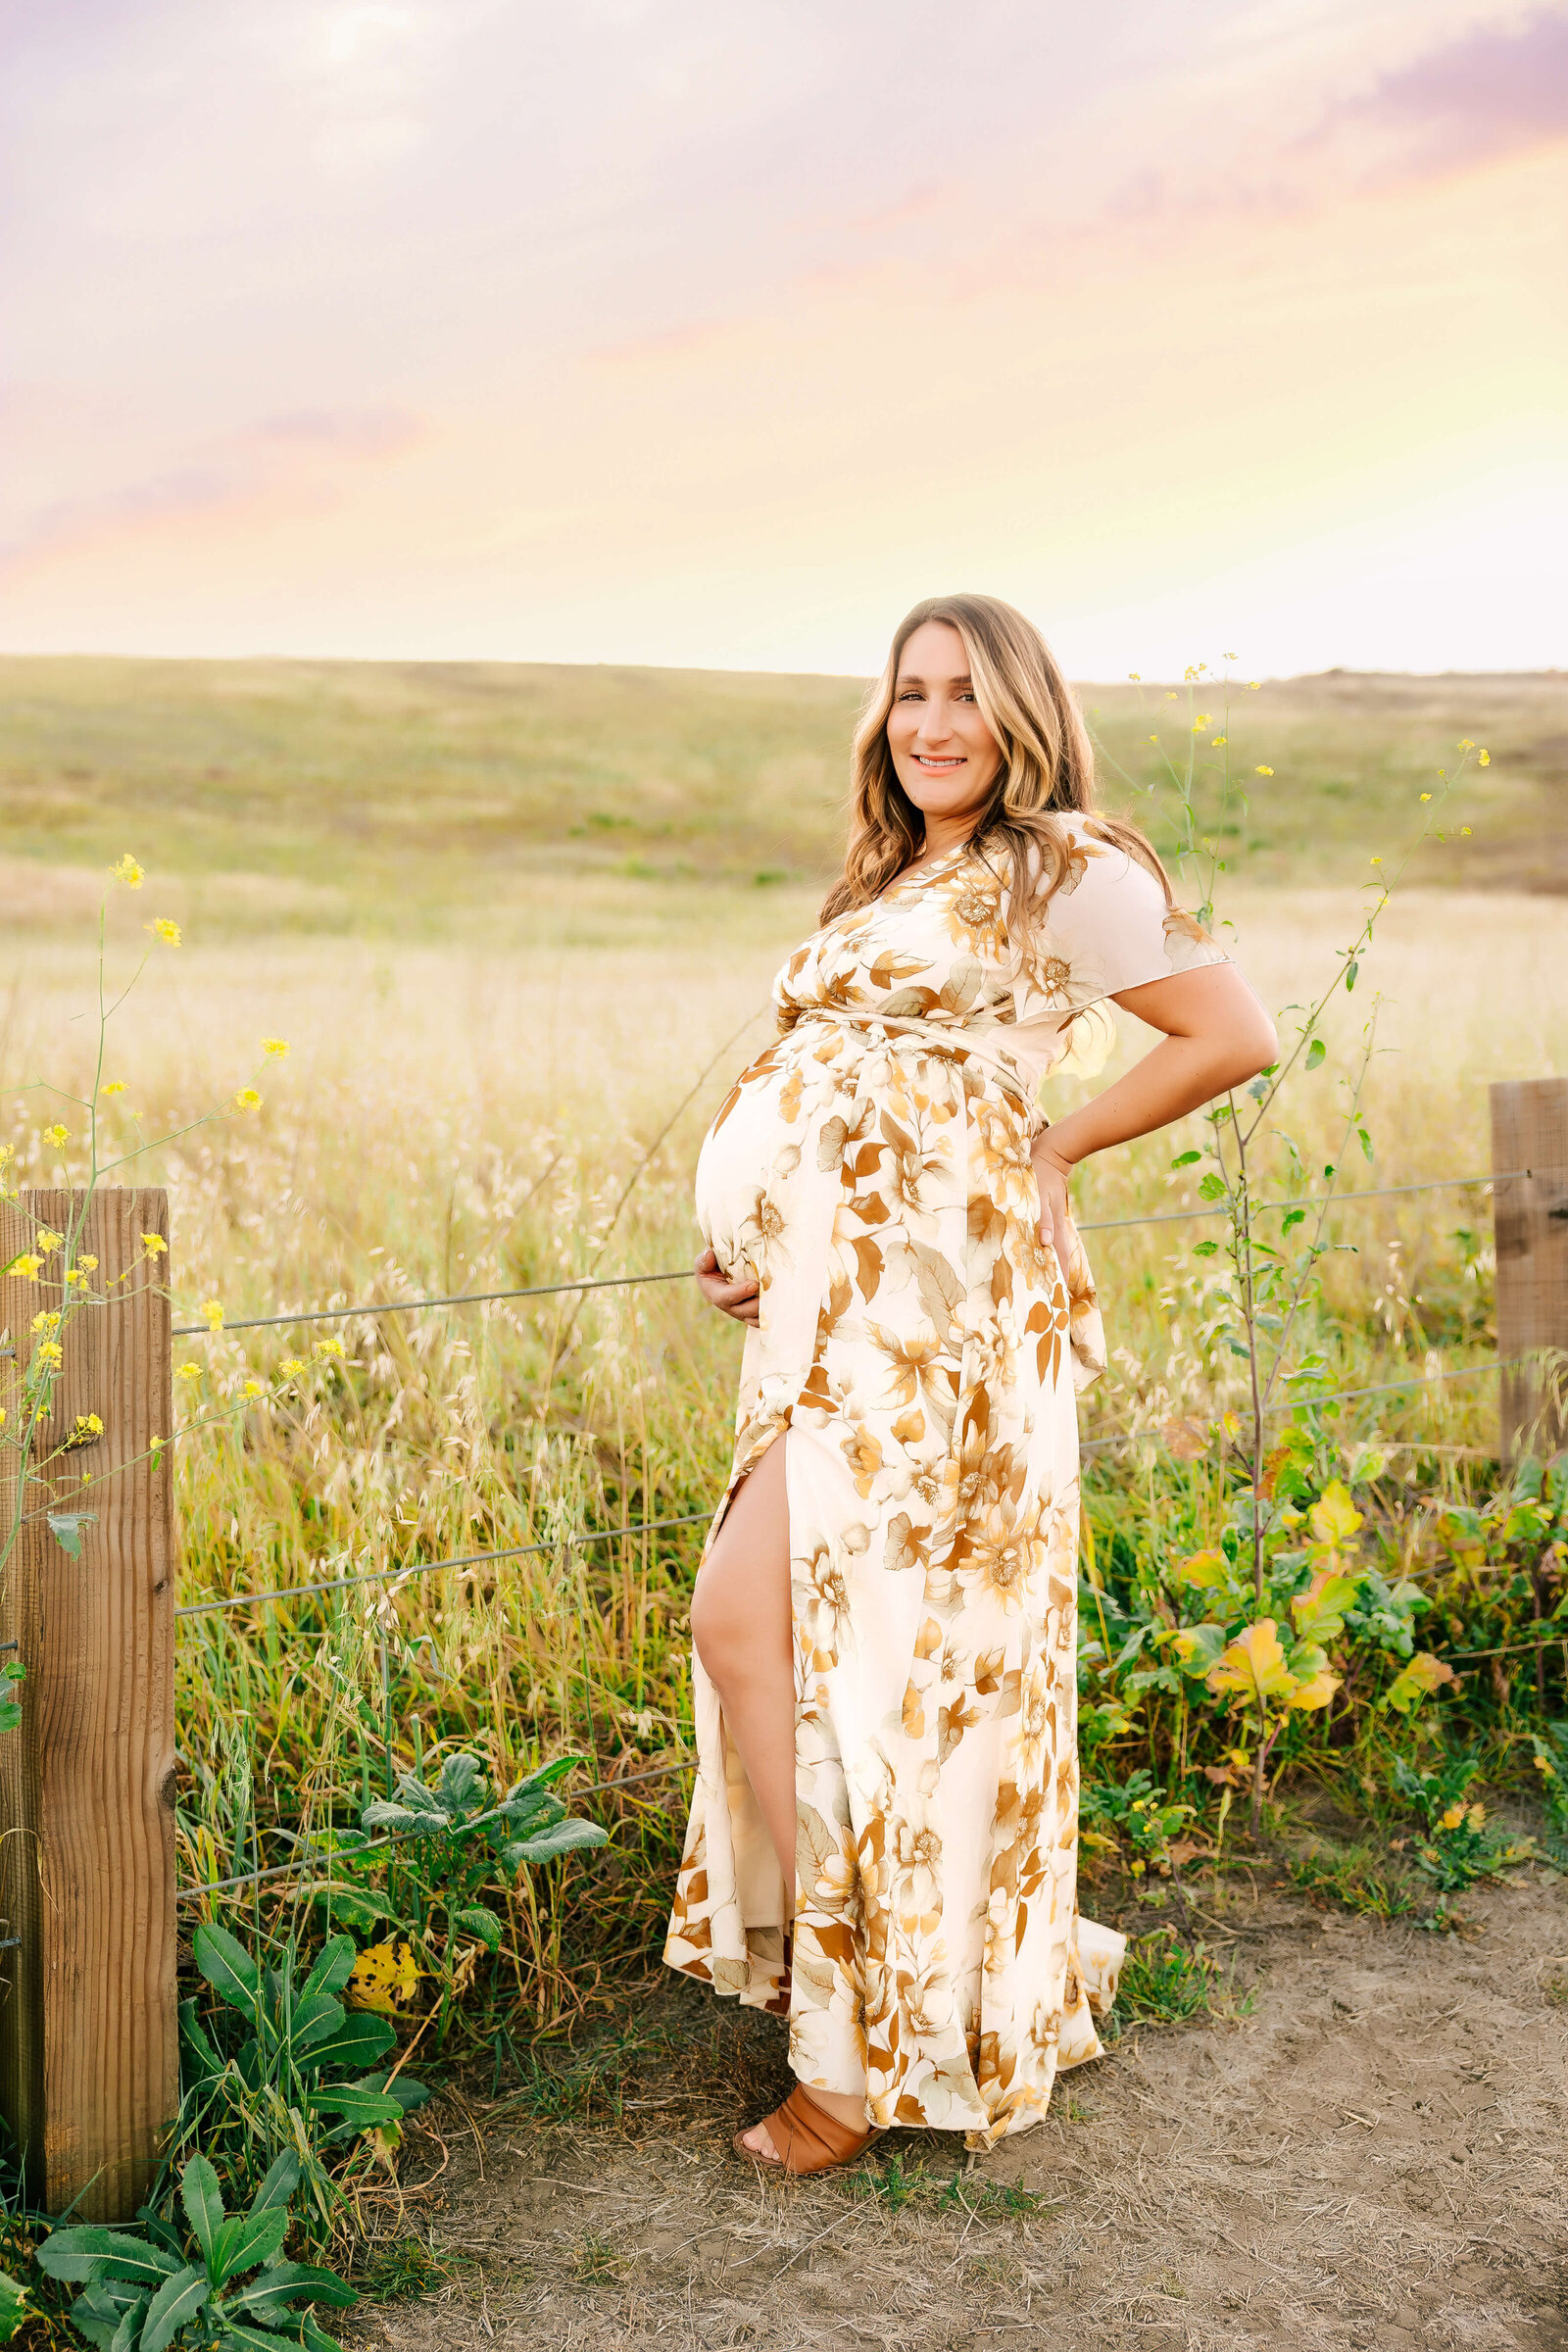 Expectant mom smiling while holding belly in a wildflower field in Irvine by Ashley Nicole.